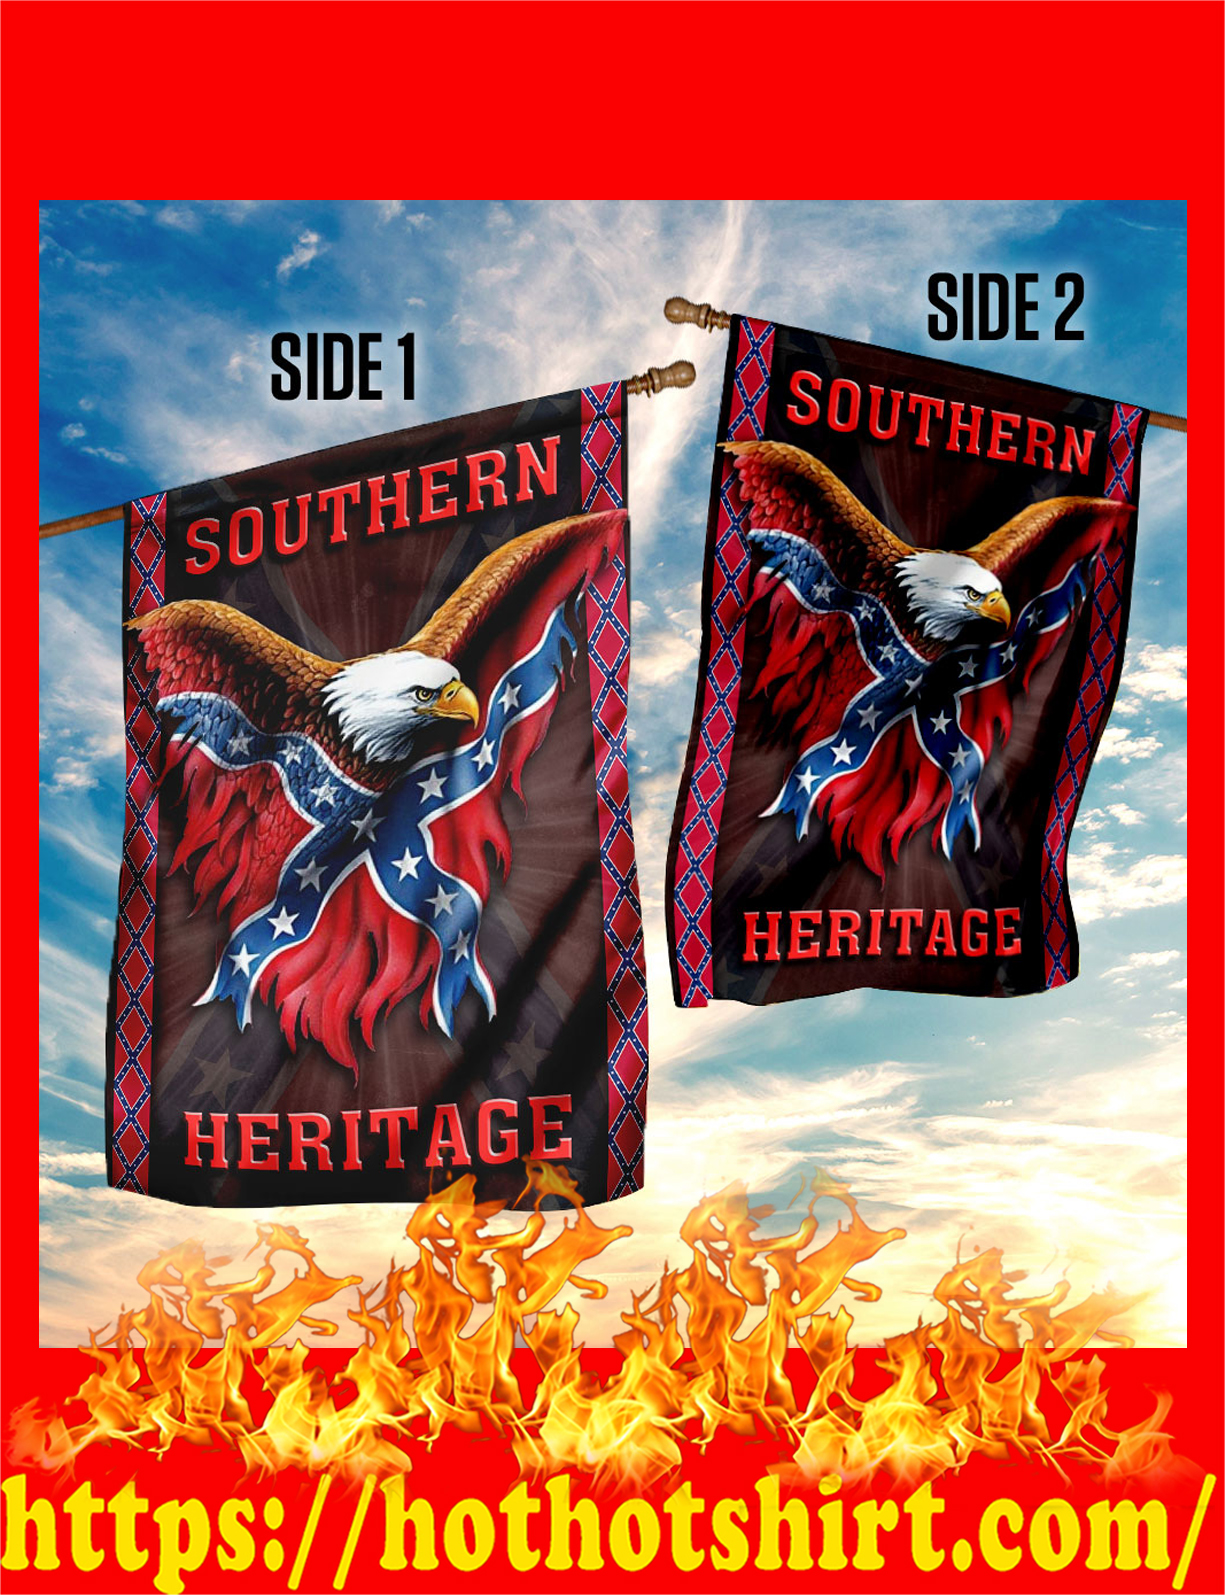 Southern heritage confederate flag